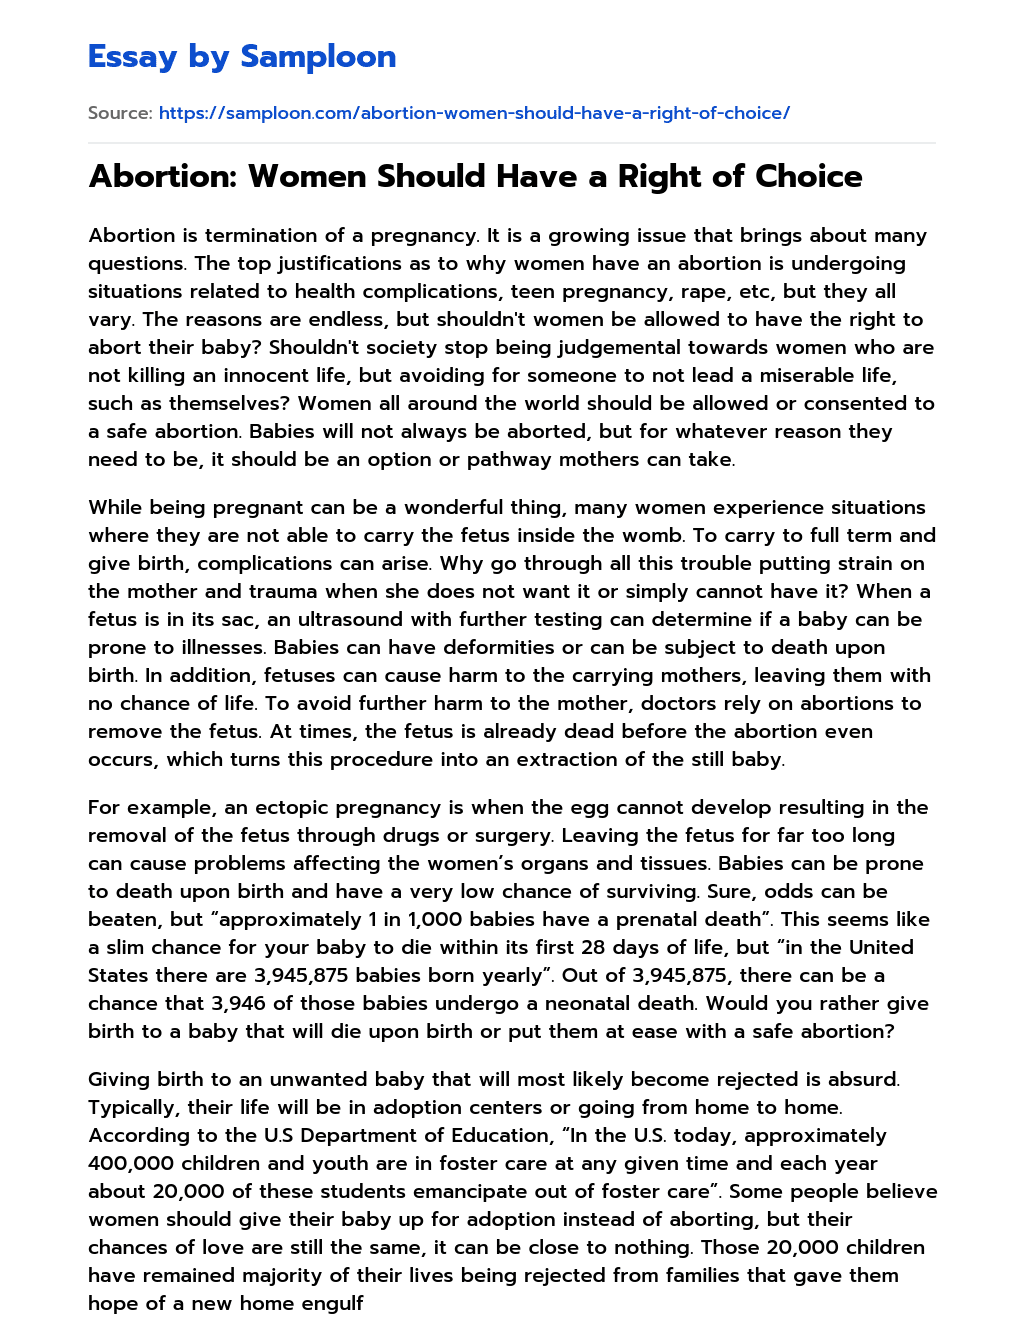 Abortion: Women Should Have a Right of Choice essay